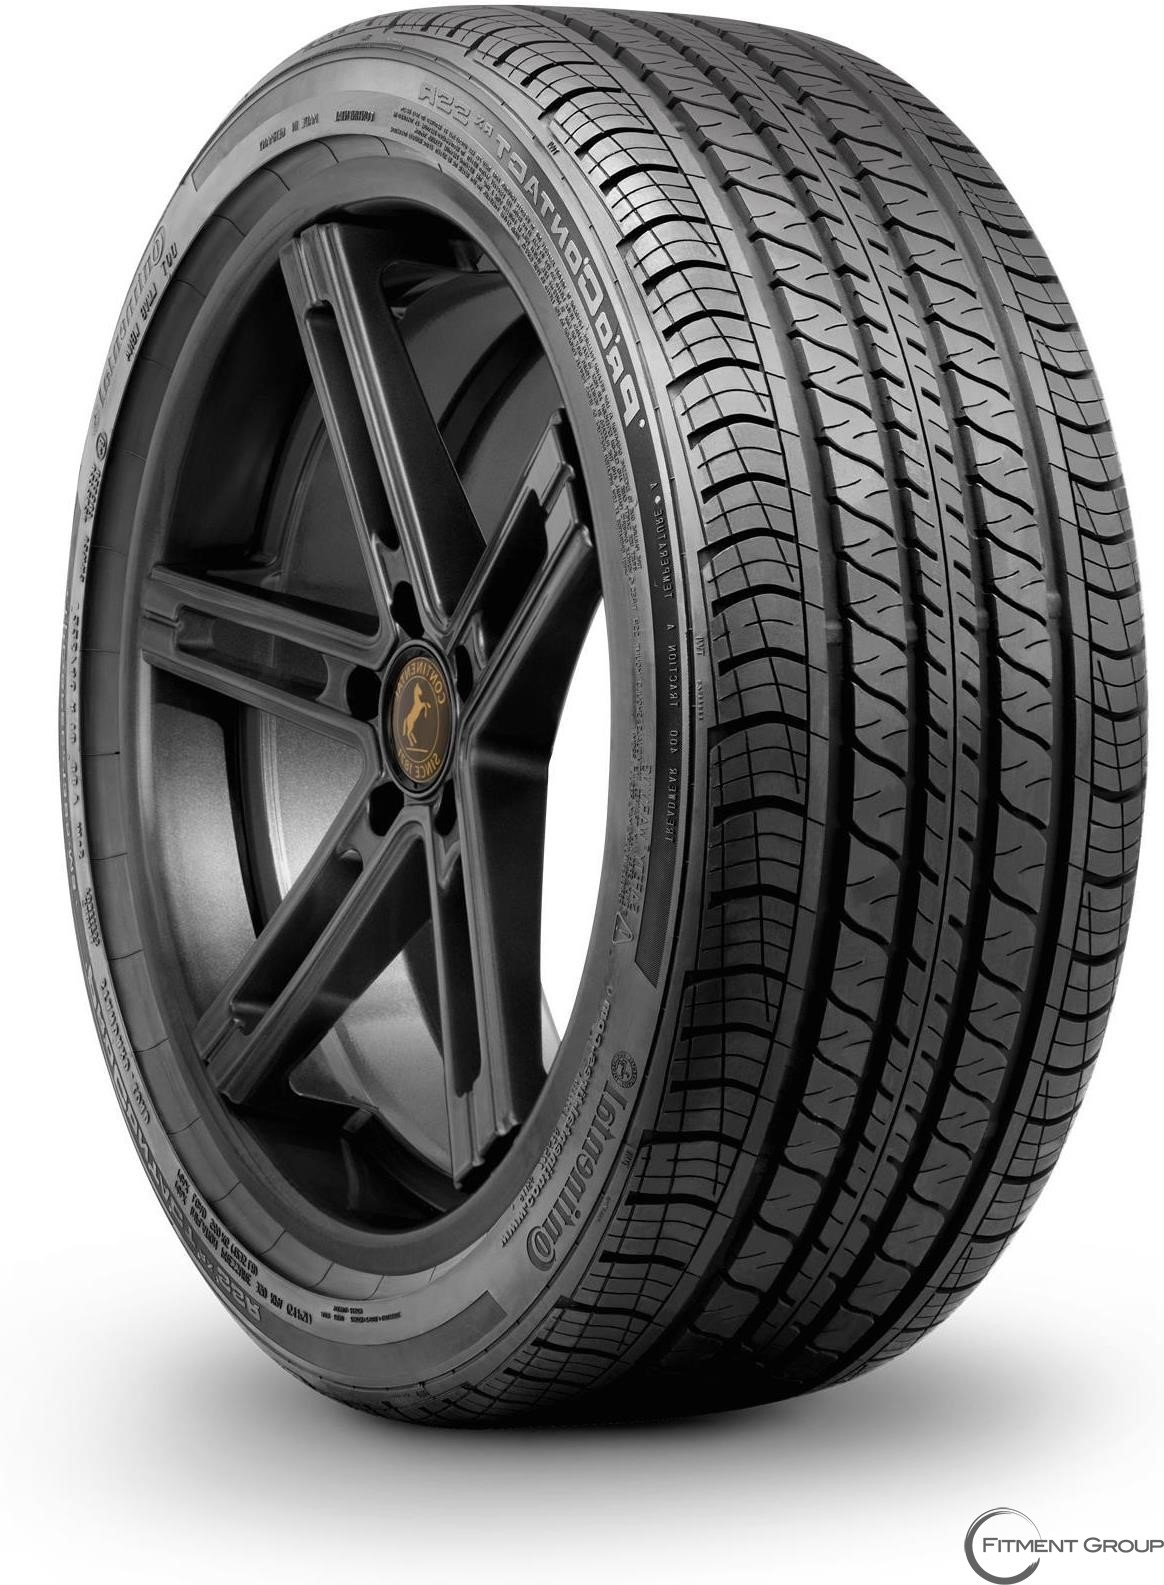 CONTINENTAL Big Brand Tire & Service has a large selection of tires